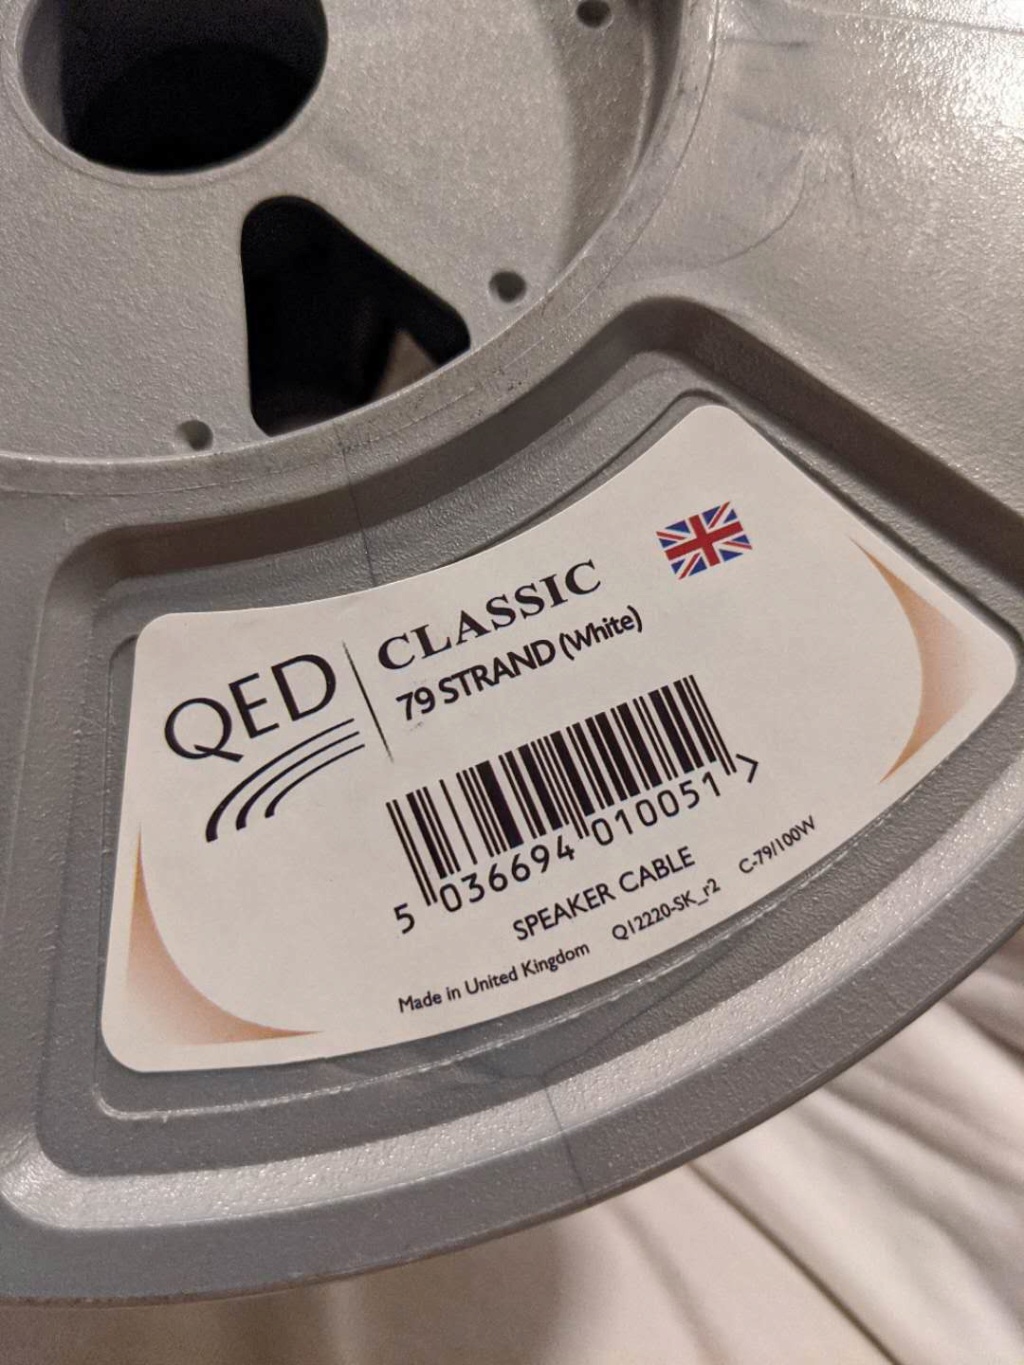 QED Classic 79 Strand White Made in UK Speaker Cable -(sold) Wechat15